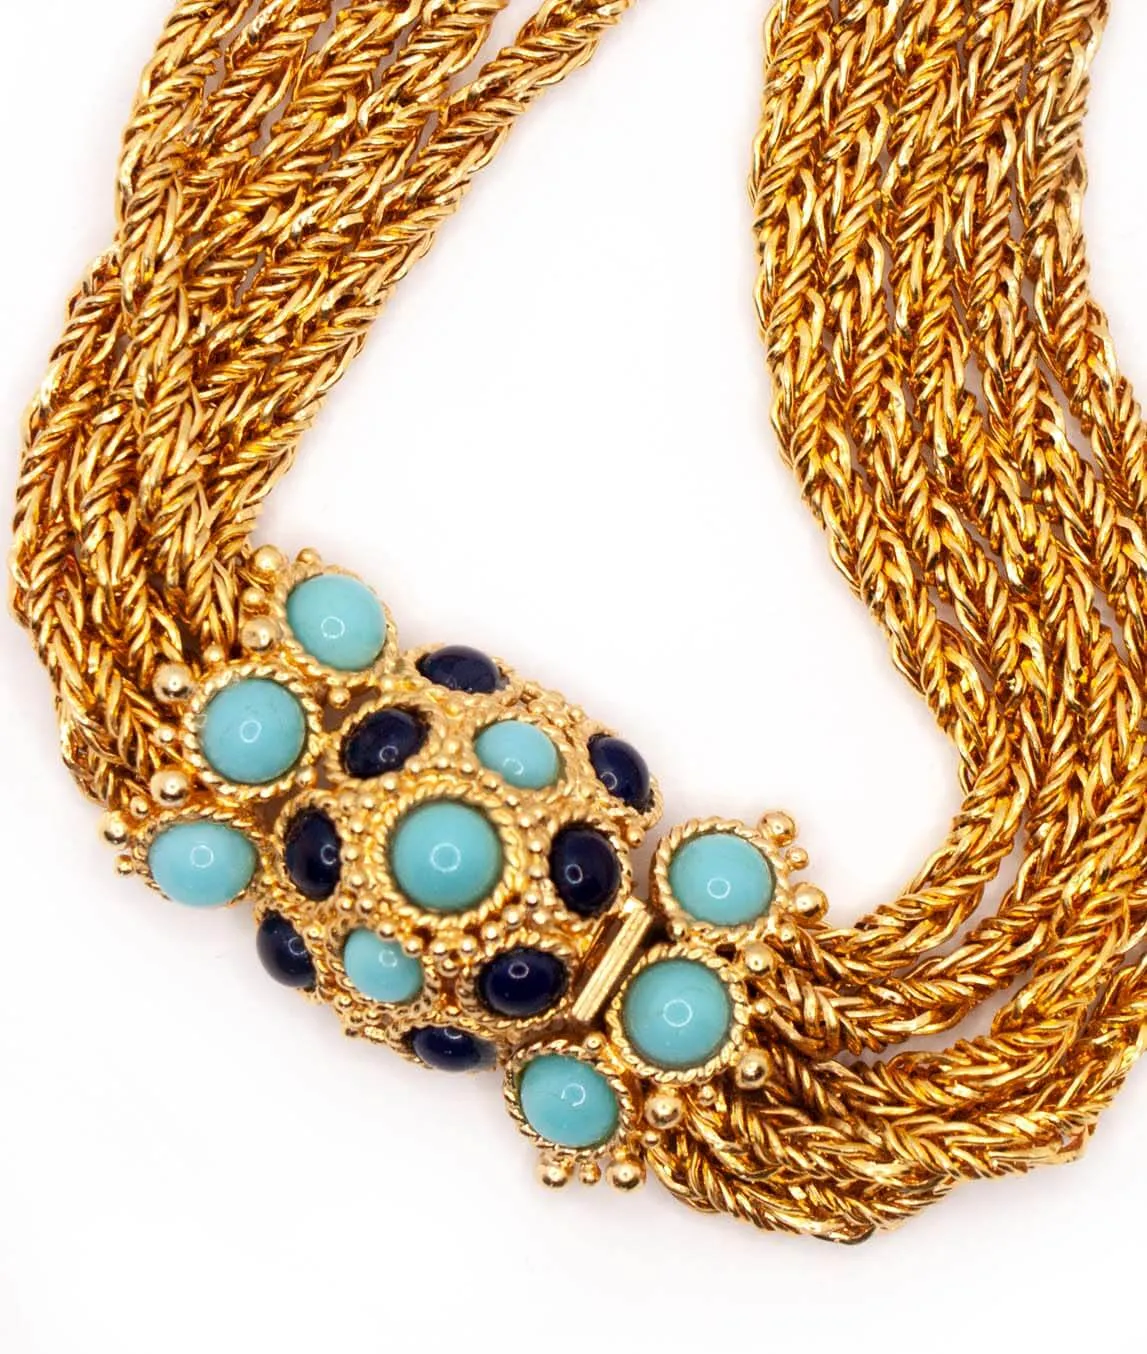 Close up of turquoise and blue glass clasp from vintage Christian Dior necklace